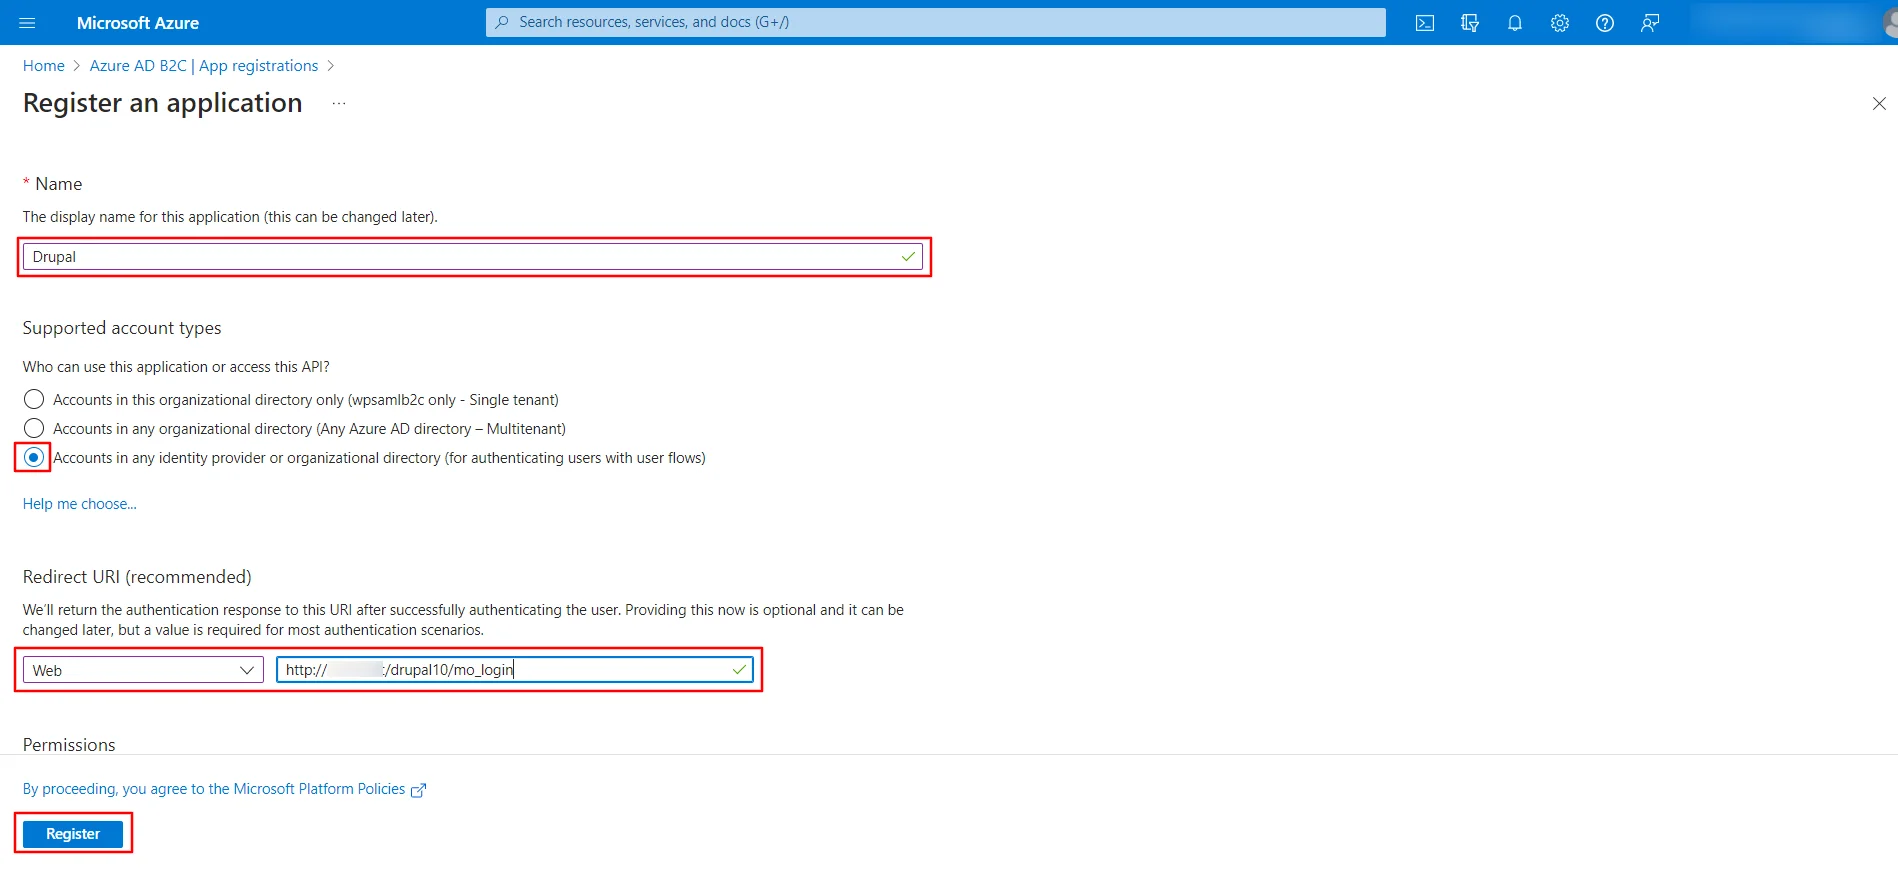 Microsoft Azure AD B2C portal, Enter required information in Register an application window